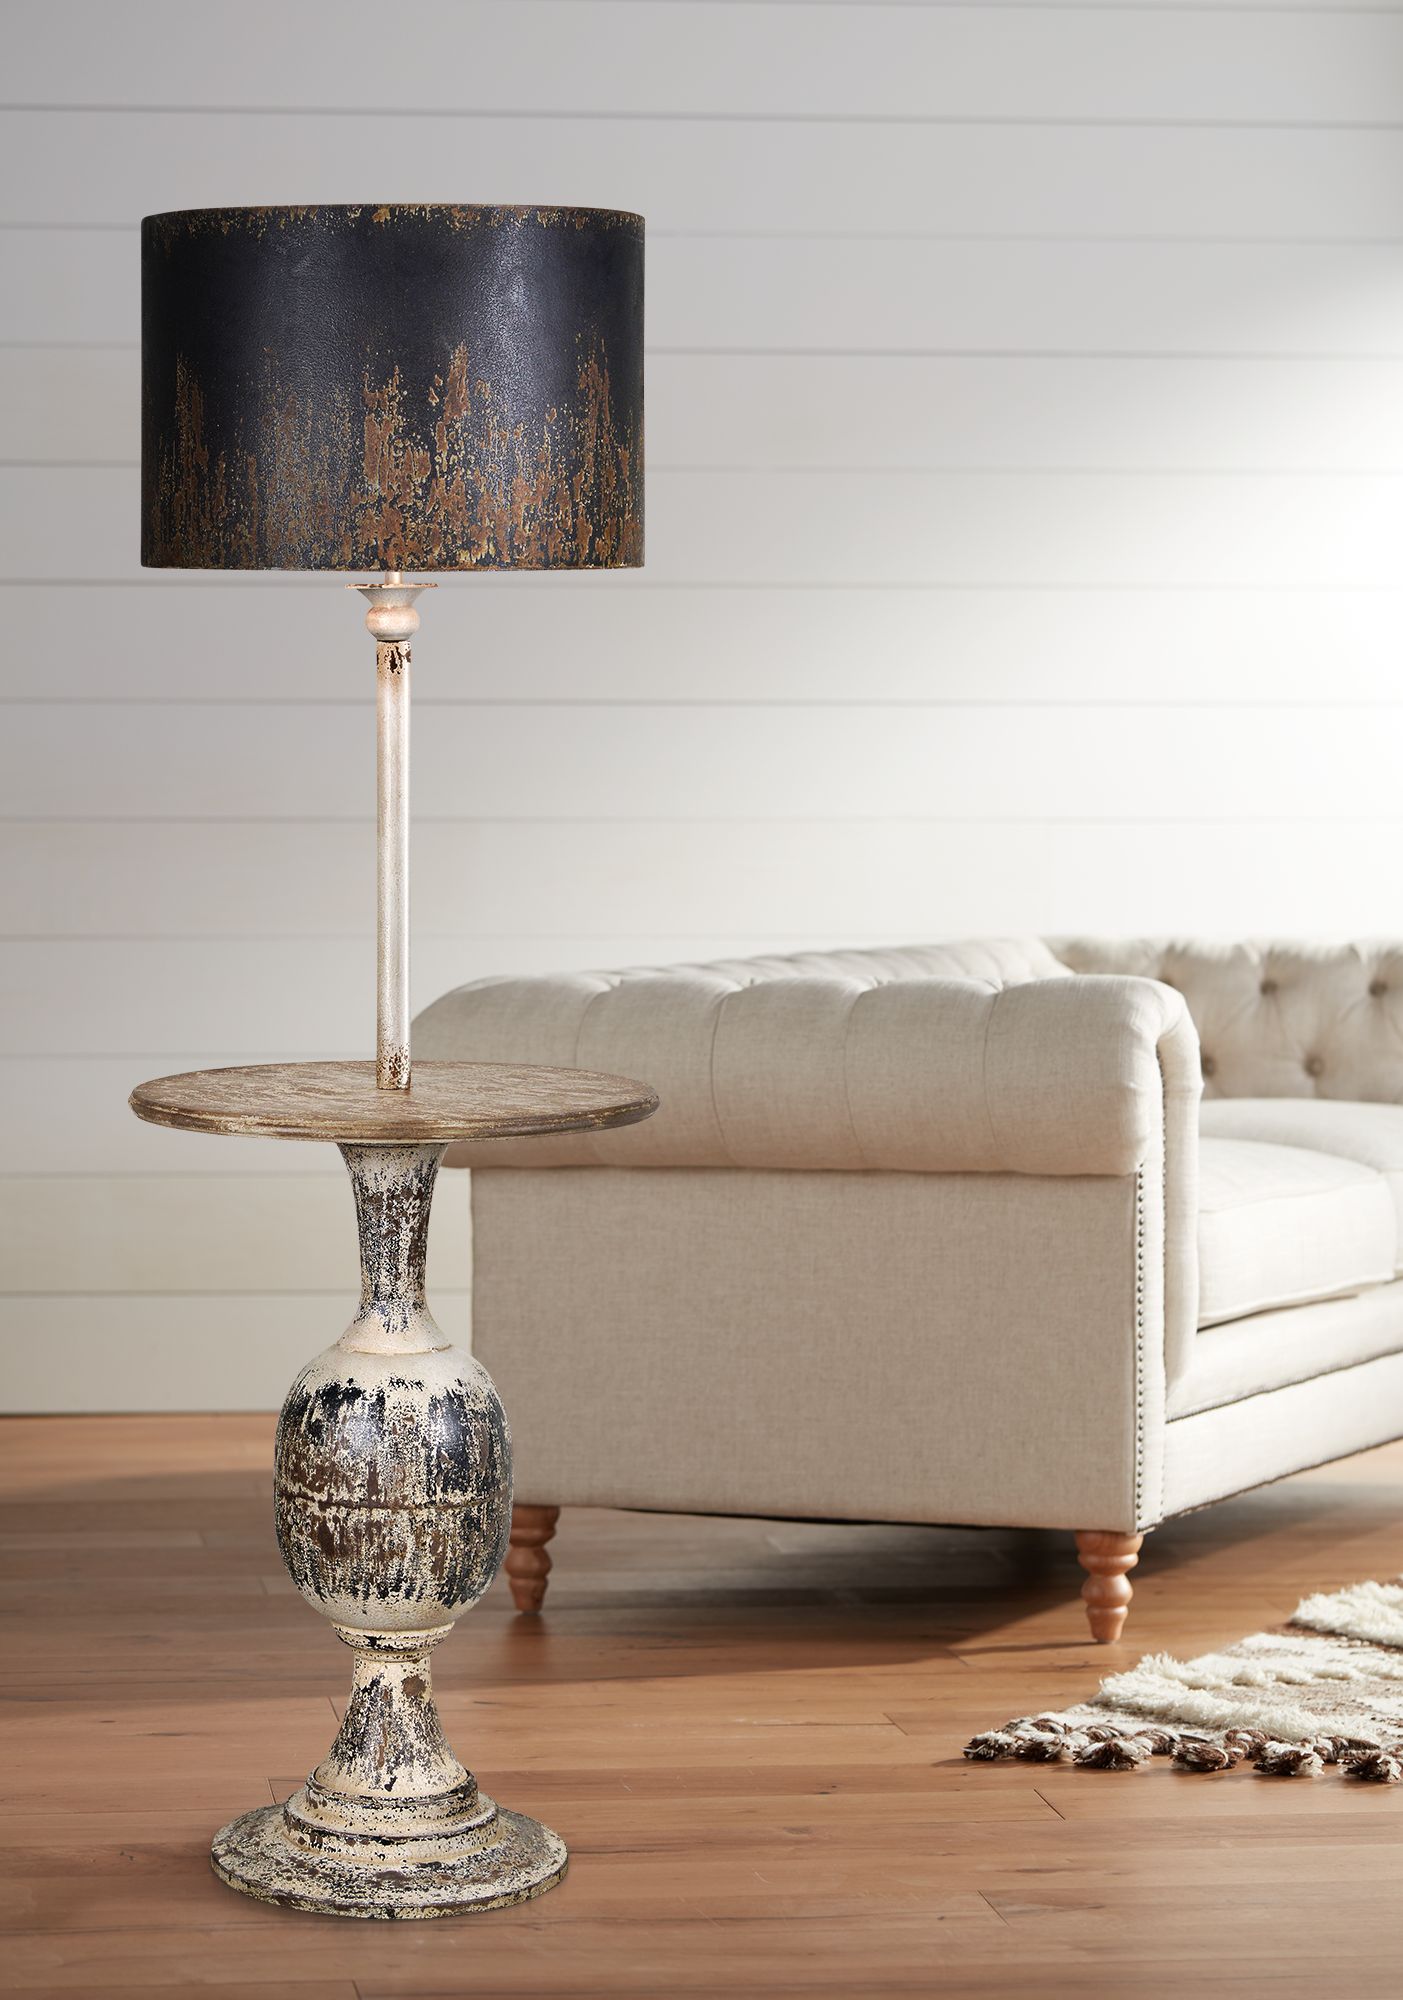 rustic floor lamp with table